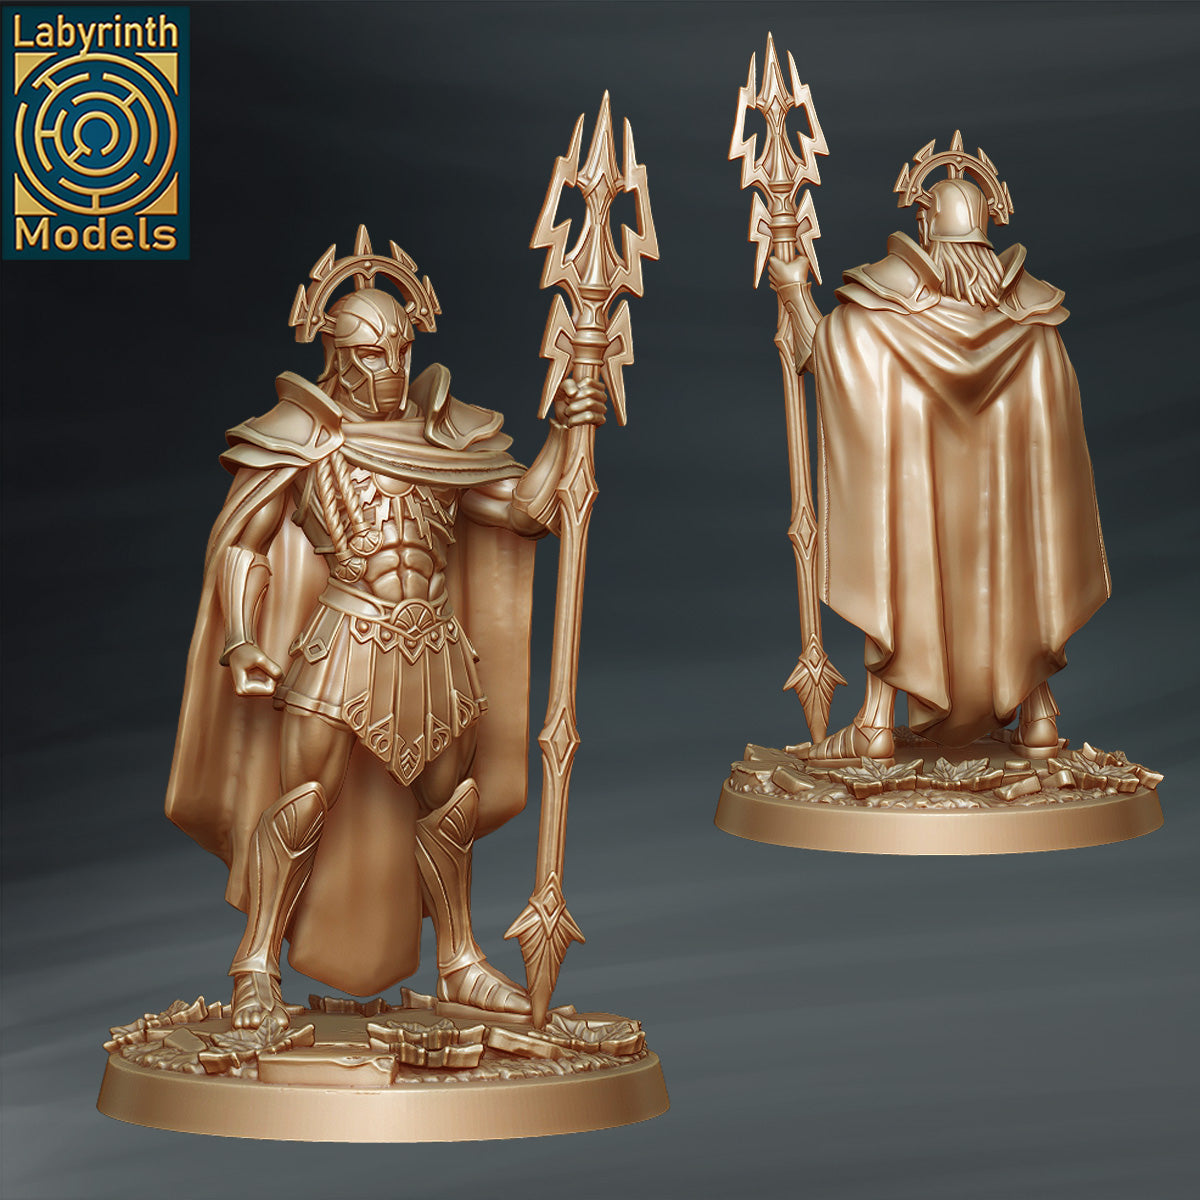 Warriors of Zeus by Labyrinth Models